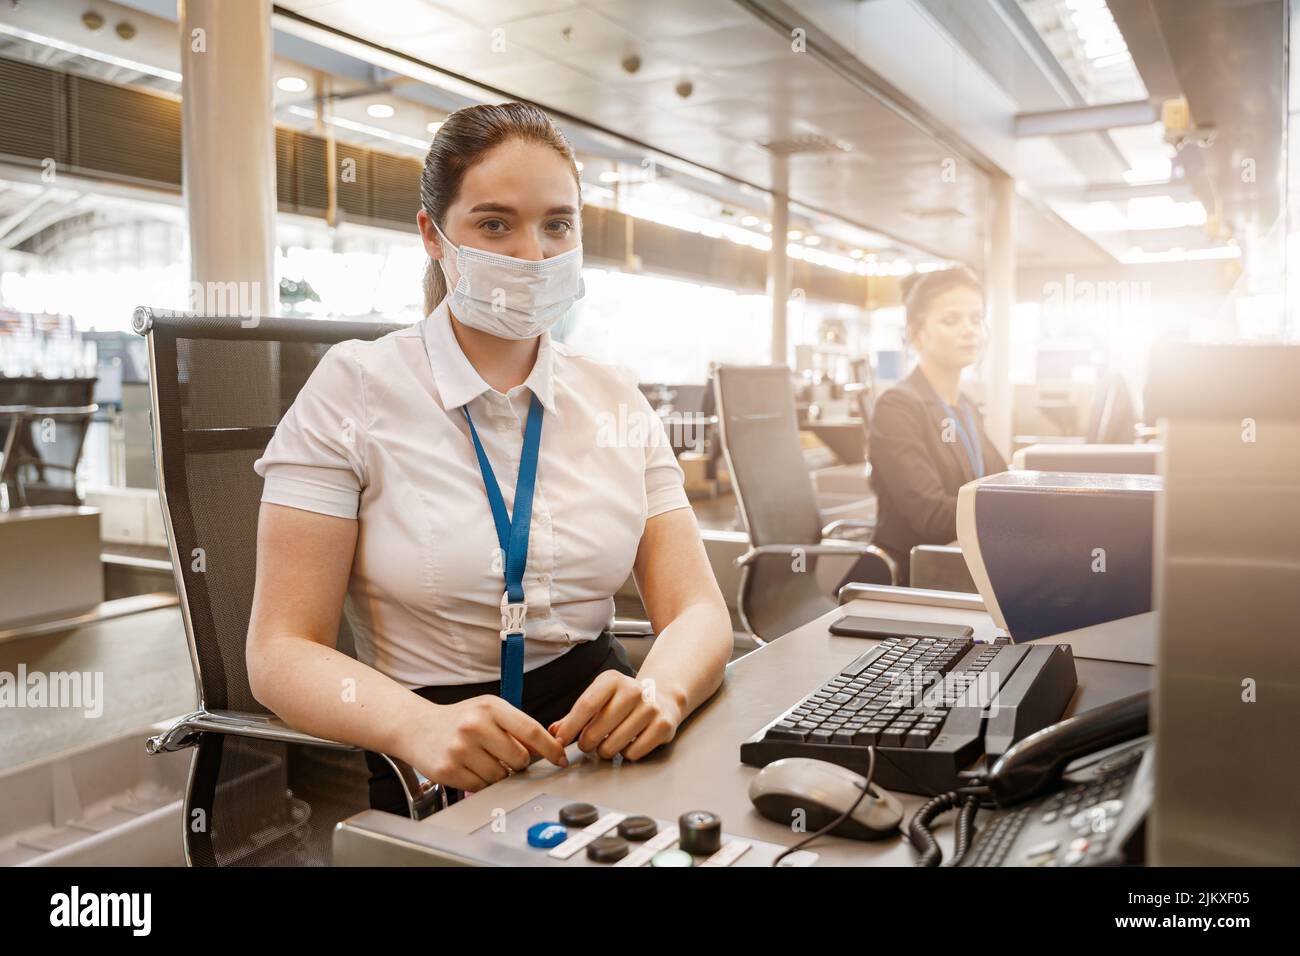 Woman airline employee wearing face mask while working at airline check in counter in airport Stock Photo